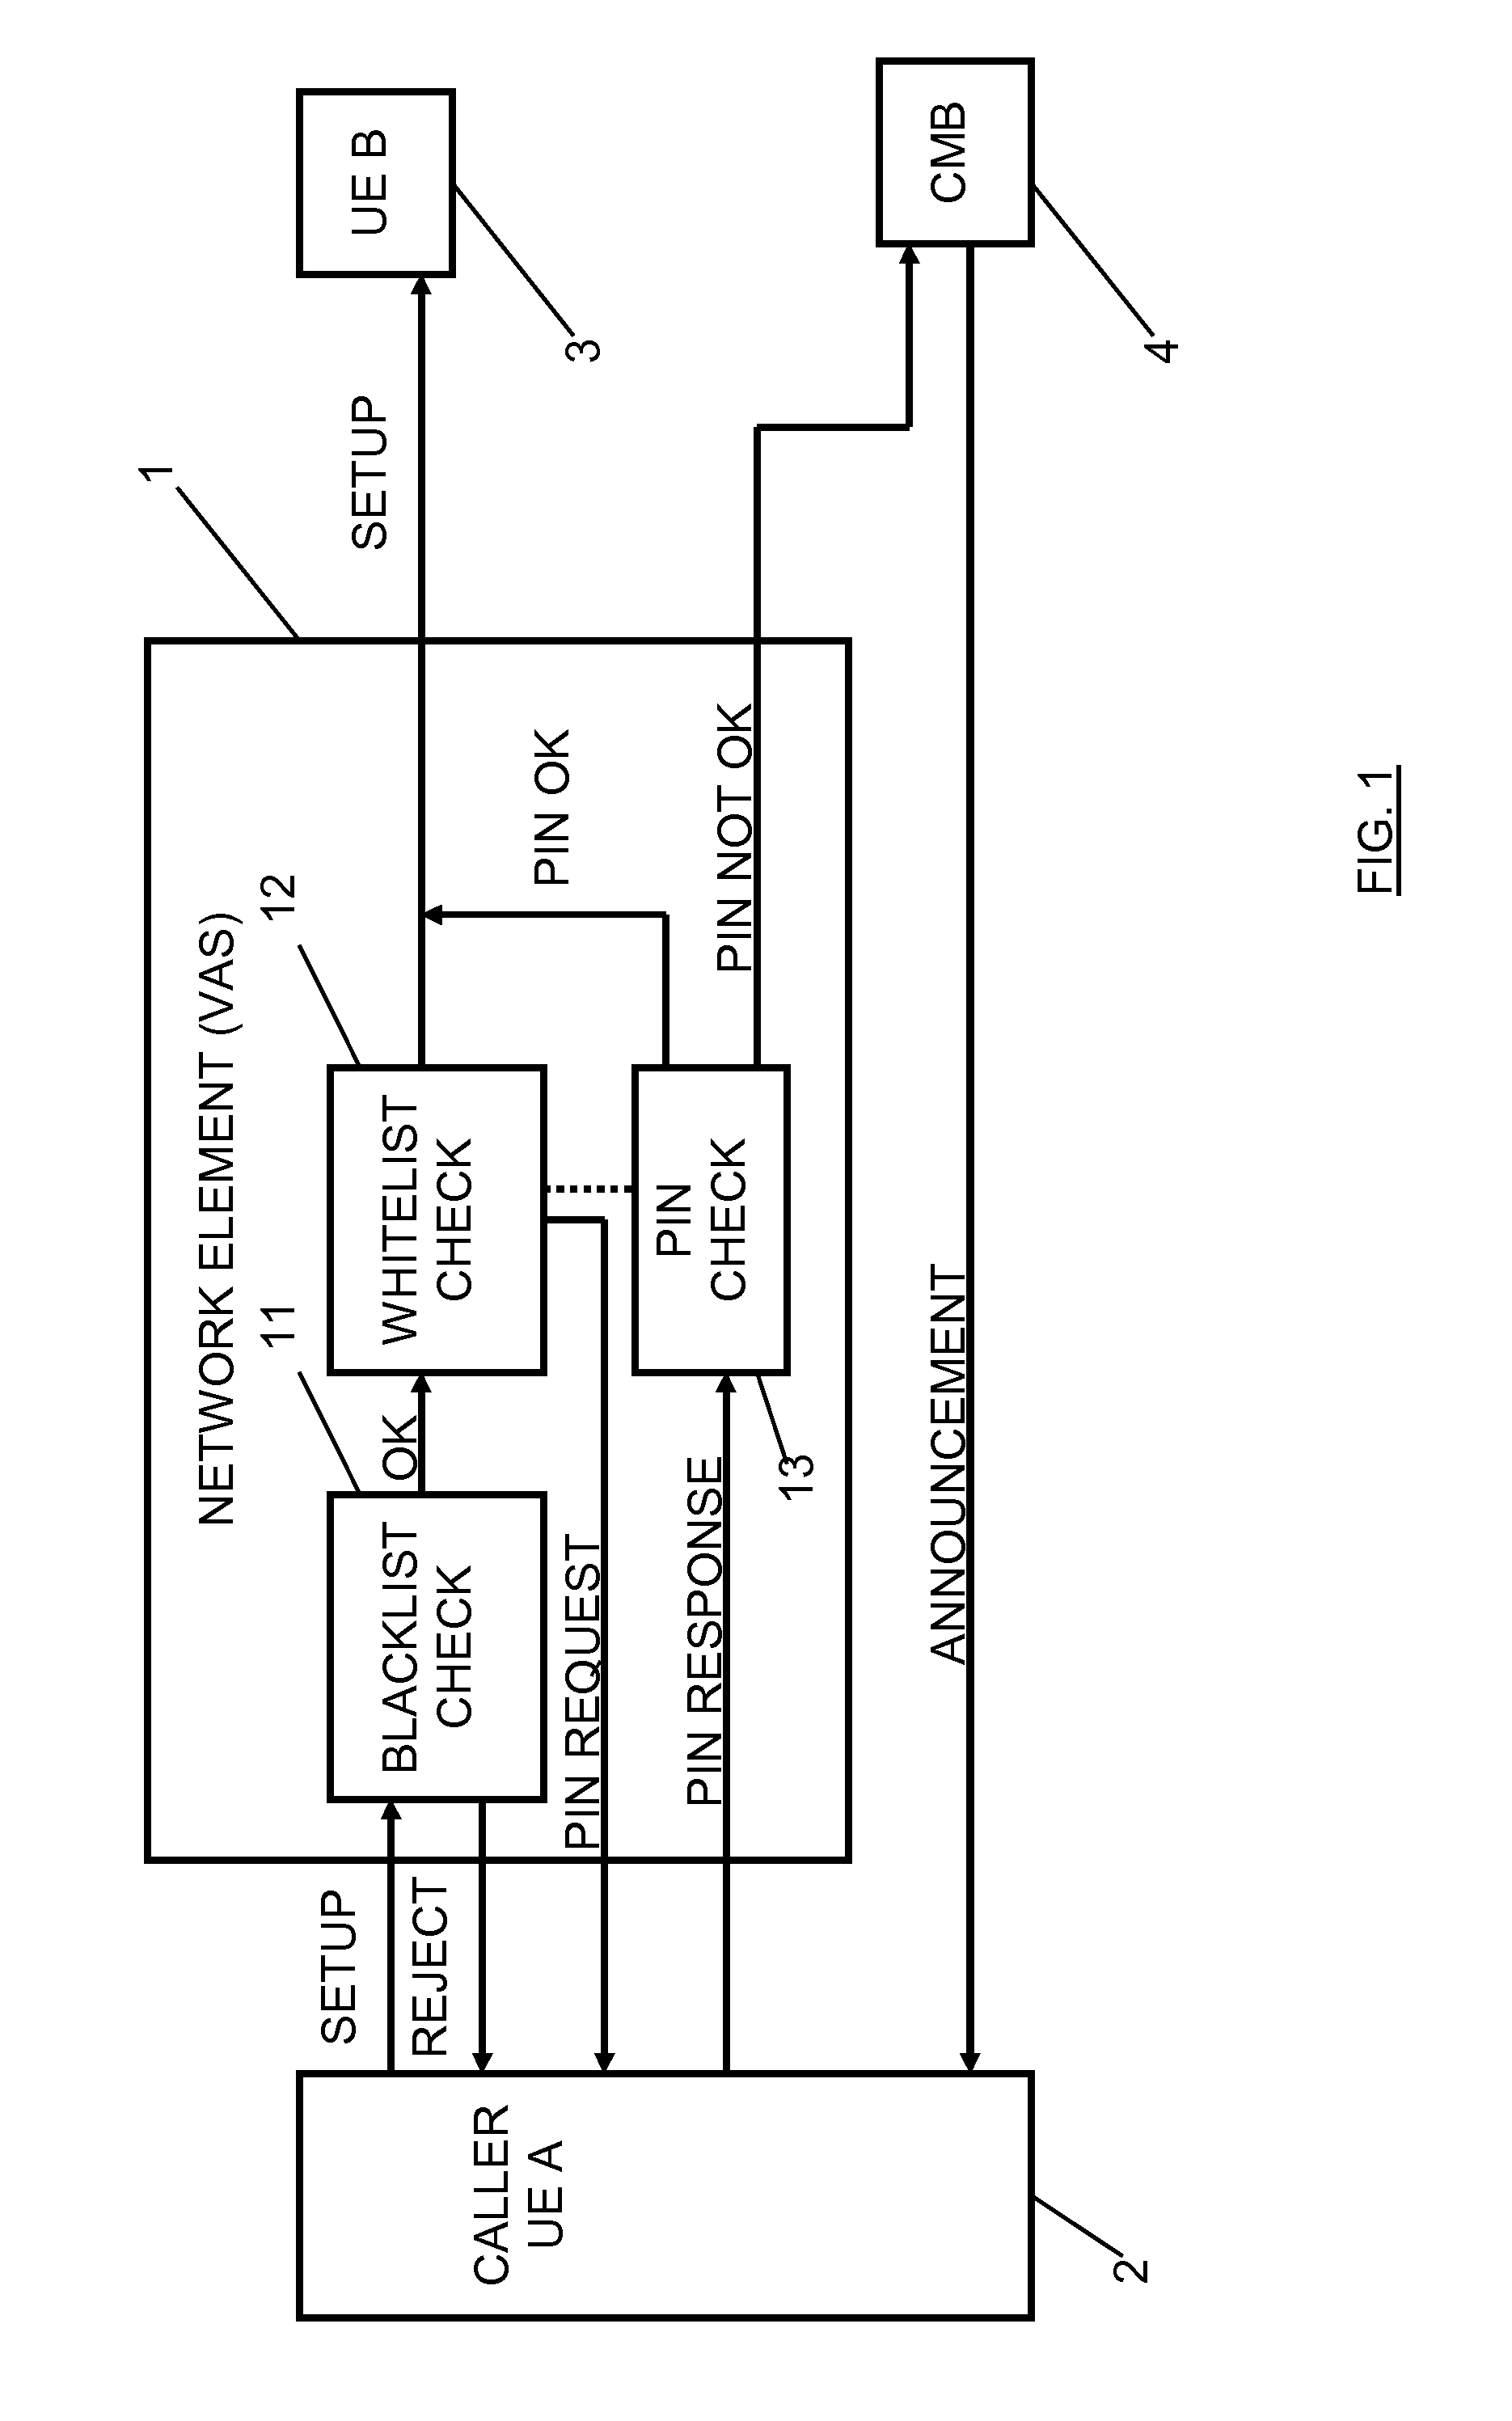 Communication Connection Establishment Control for Preventing Unsolicited Communication